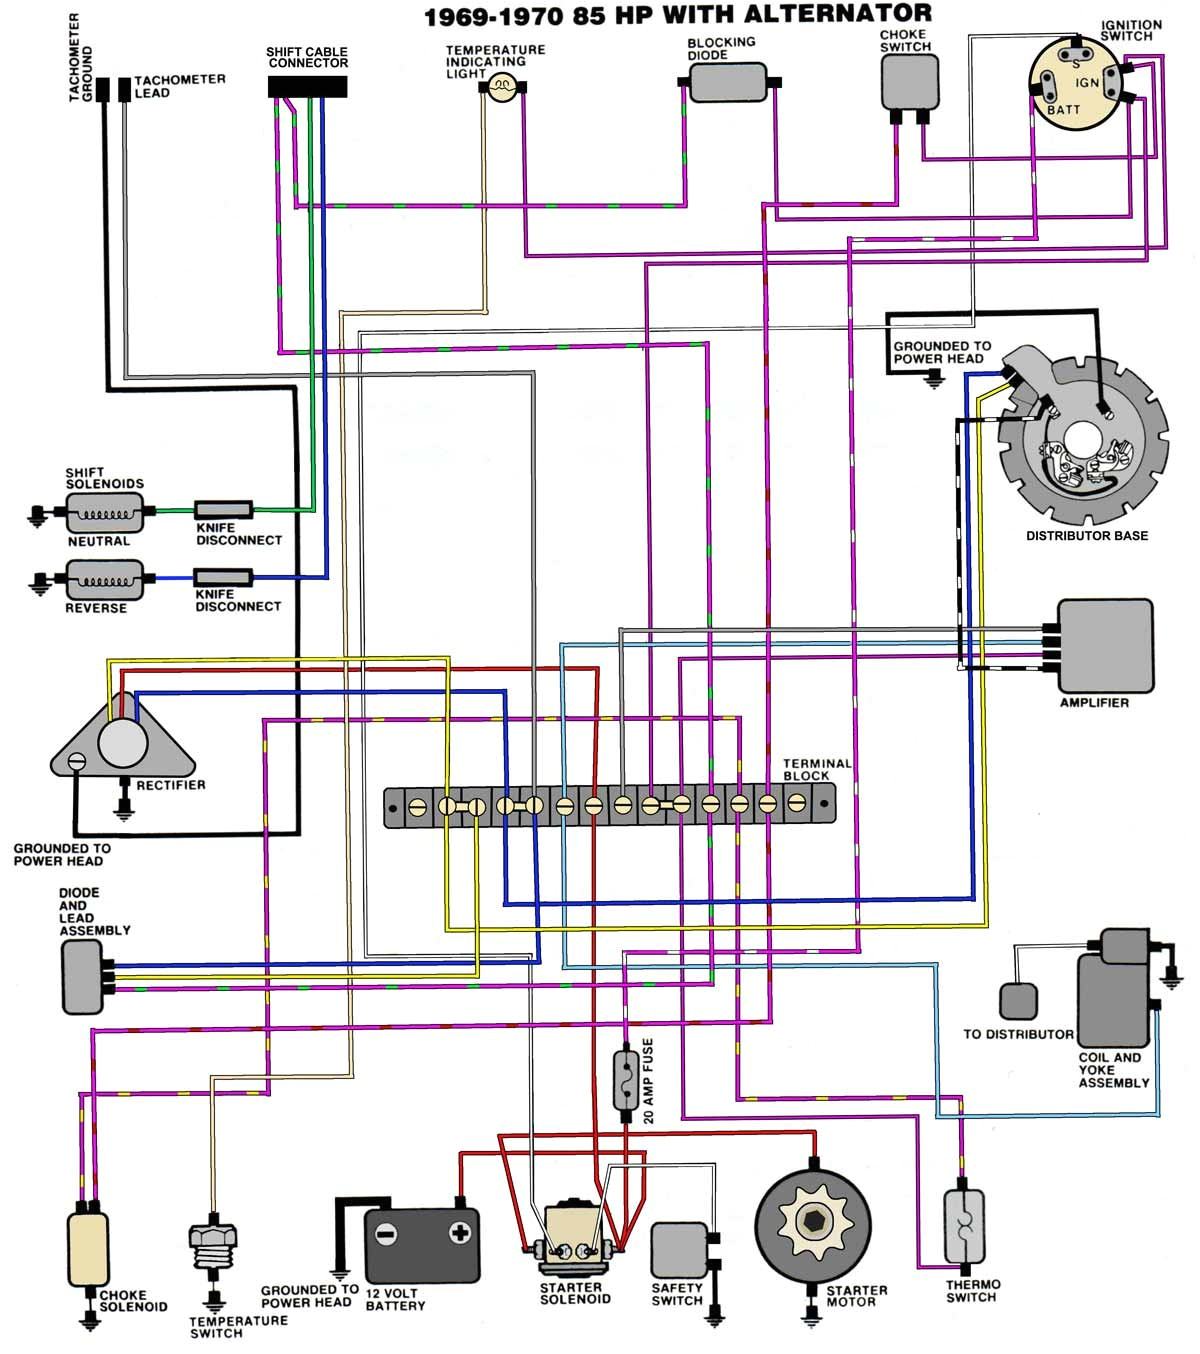 35 hp johnson outboard wiring diagram